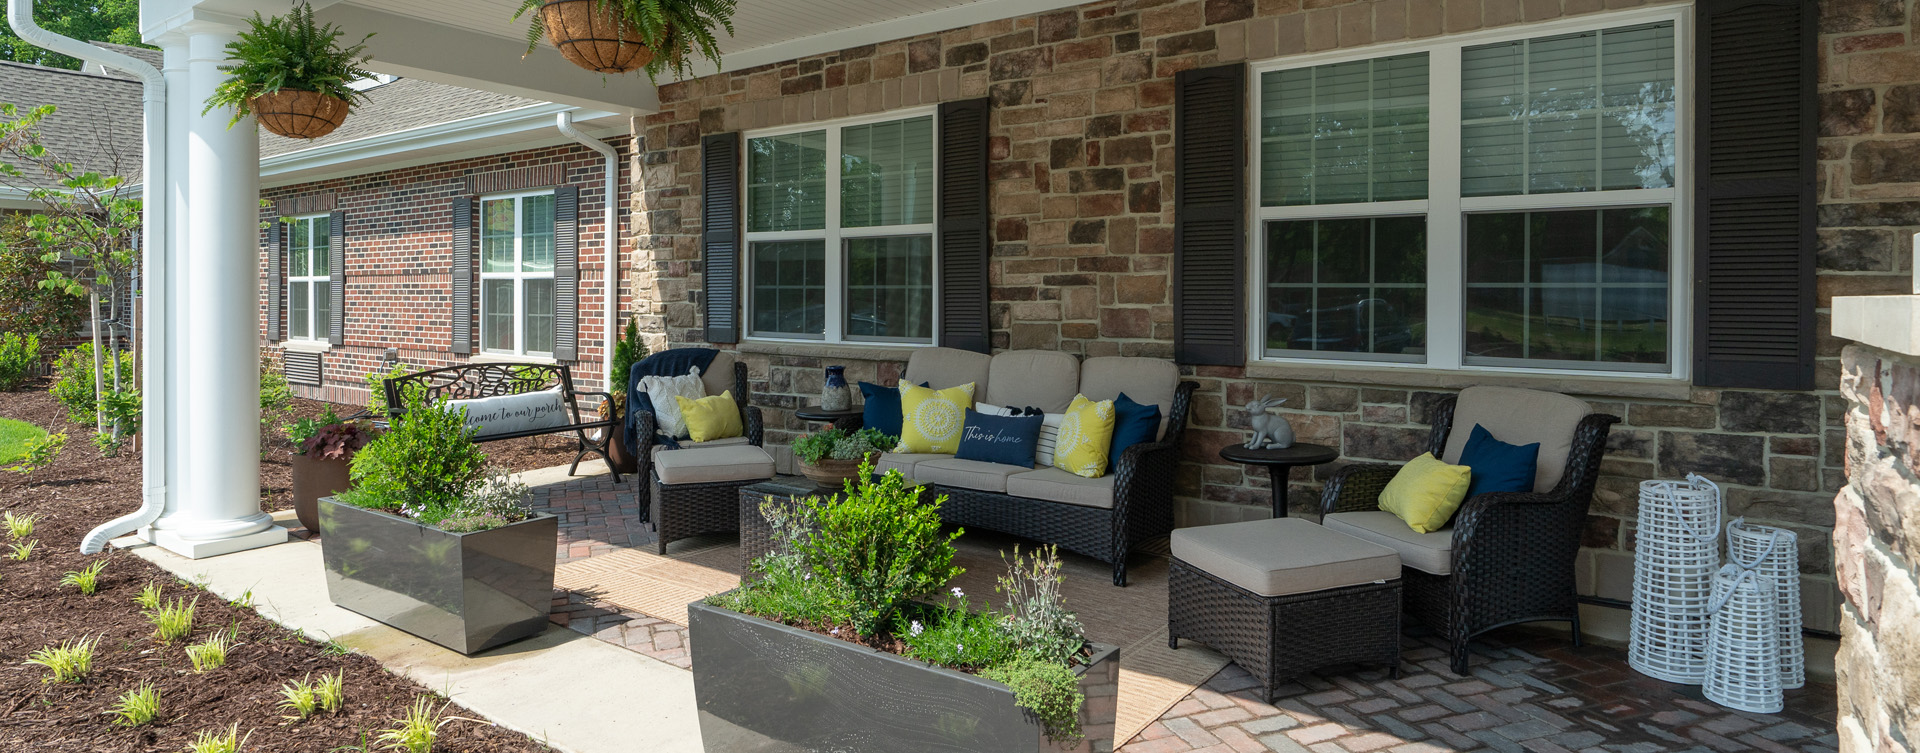 Sip on your favorite drink on the porch at Bickford of Chesapeake